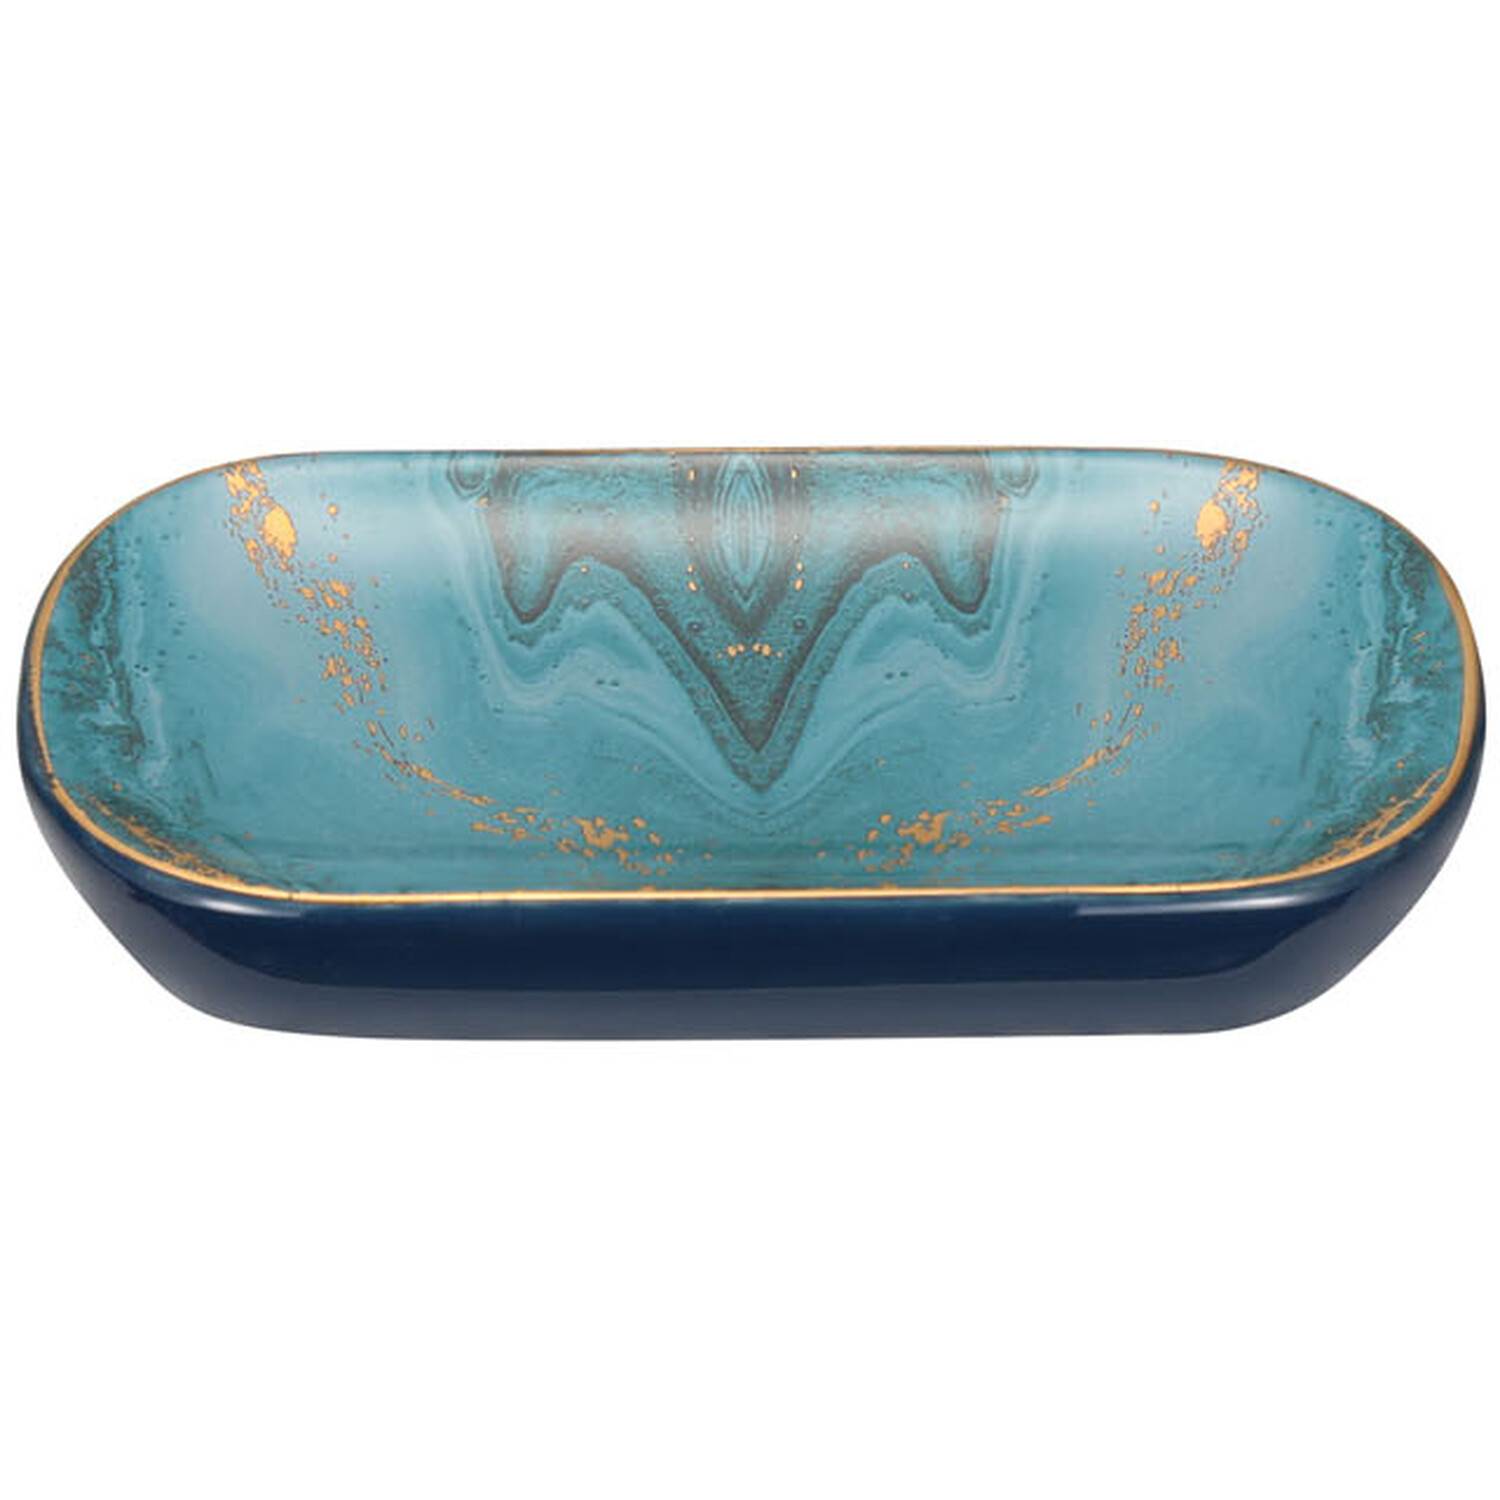 Agate Soap Dish - Turquoise Image 1